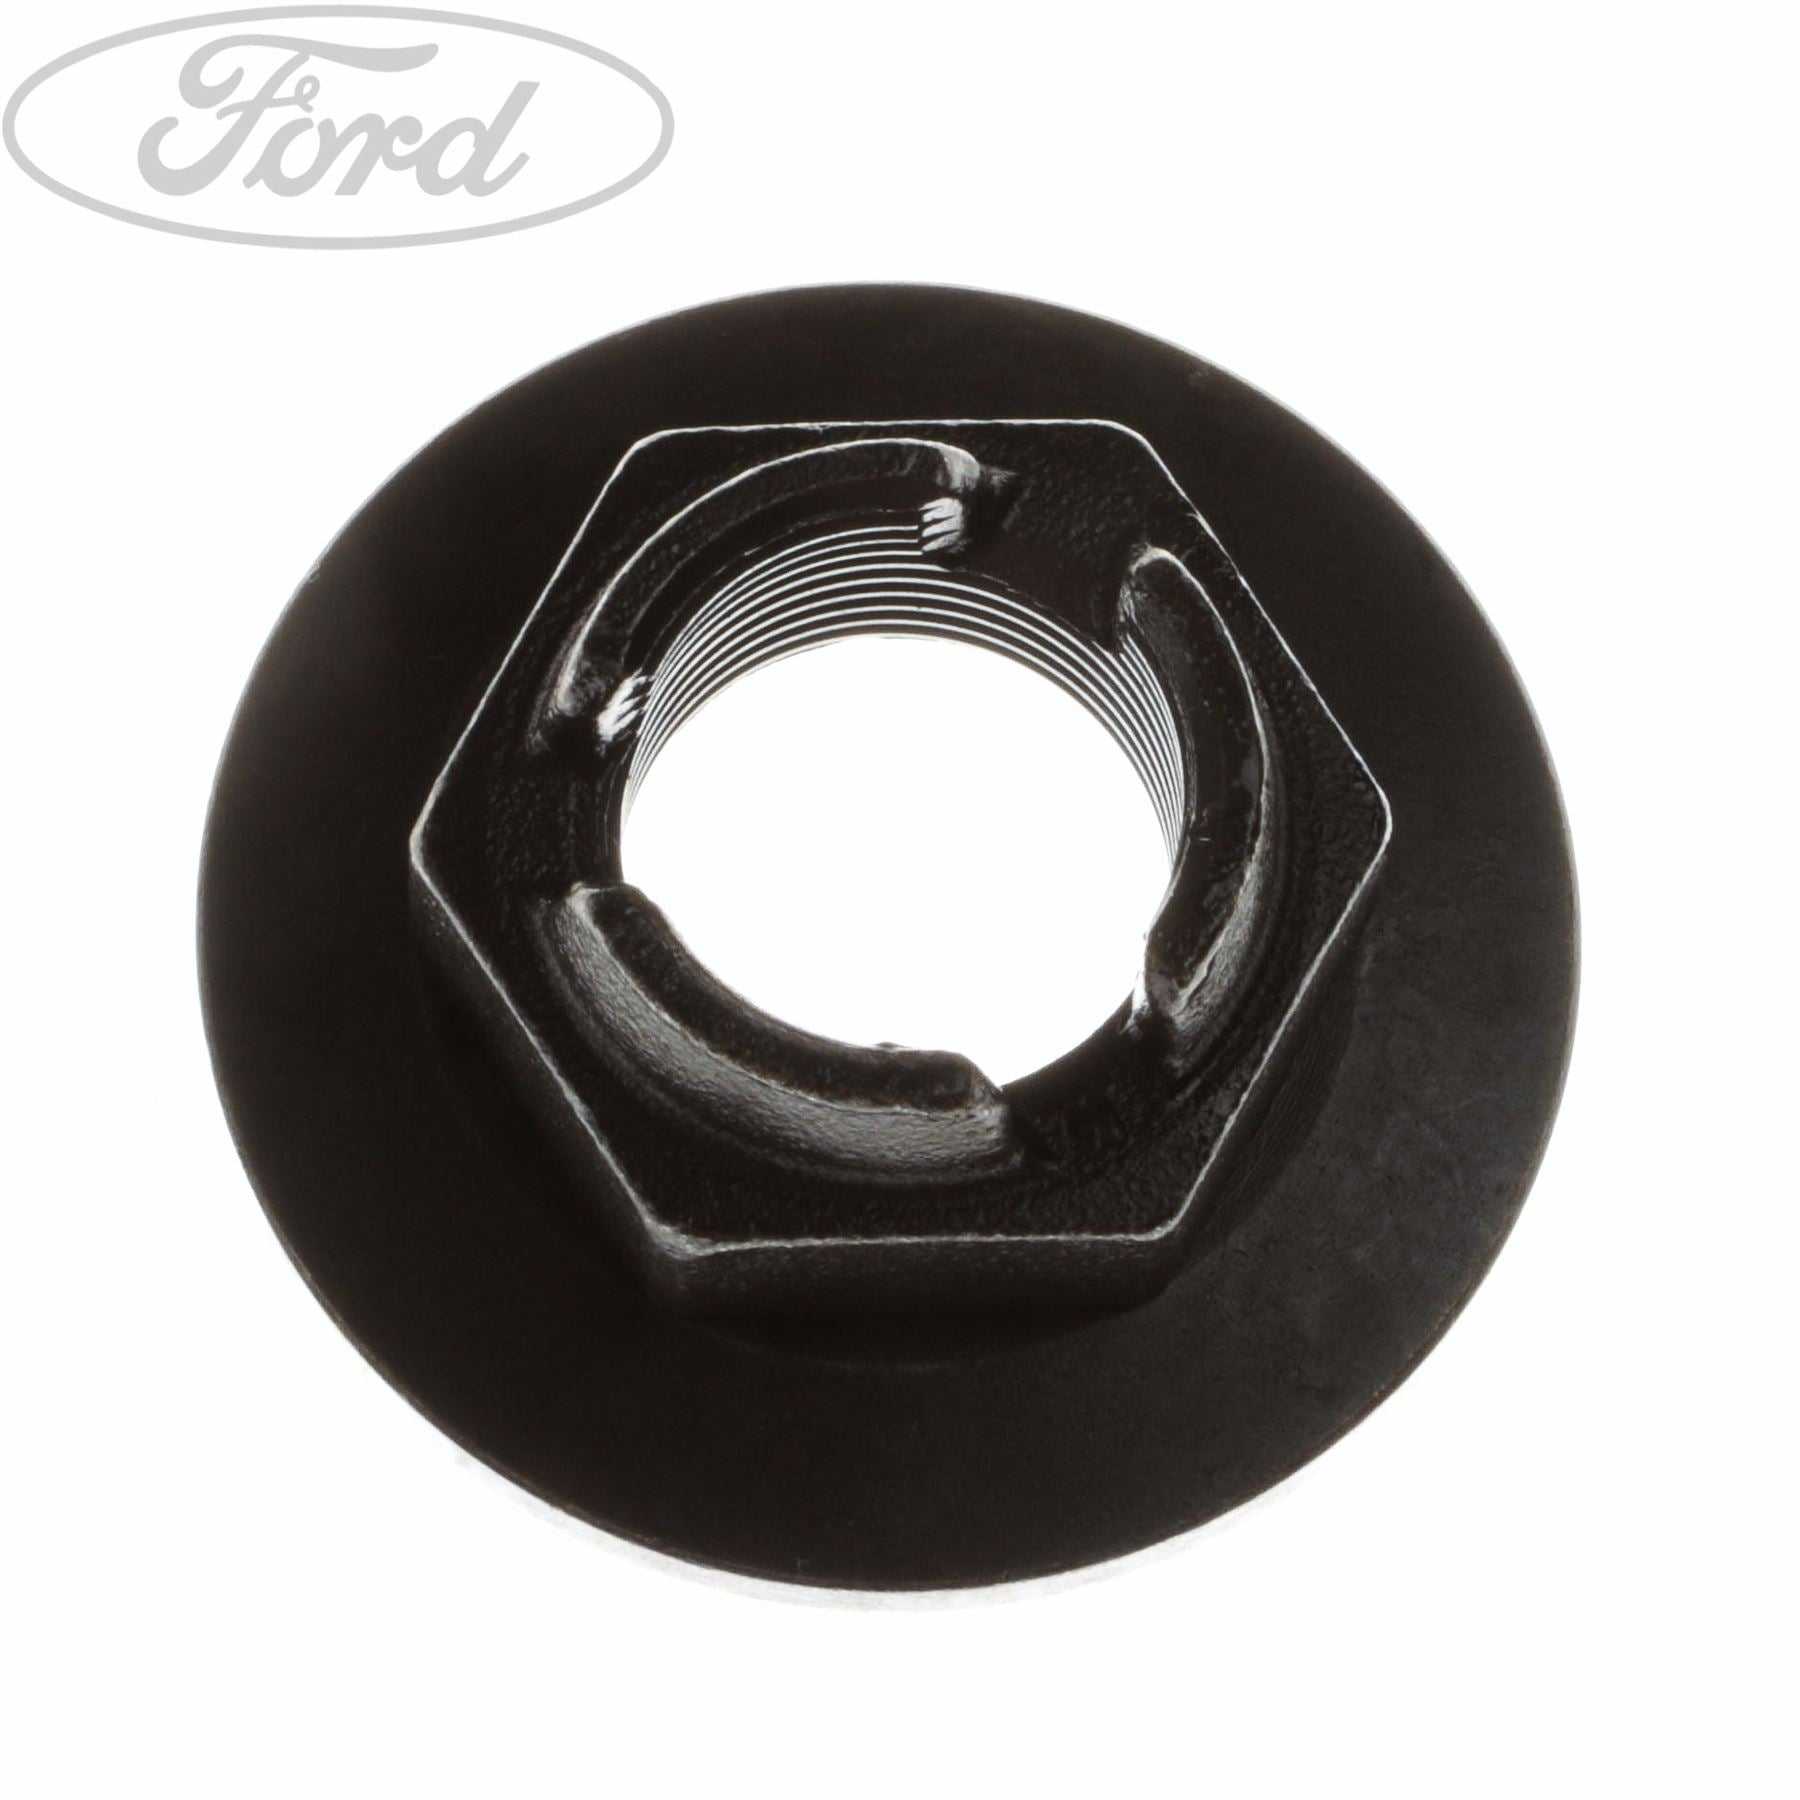 Ford, TRANSIT CONNECT REAR KNUCKLE SPINDLE HUB NUT 2002-2013